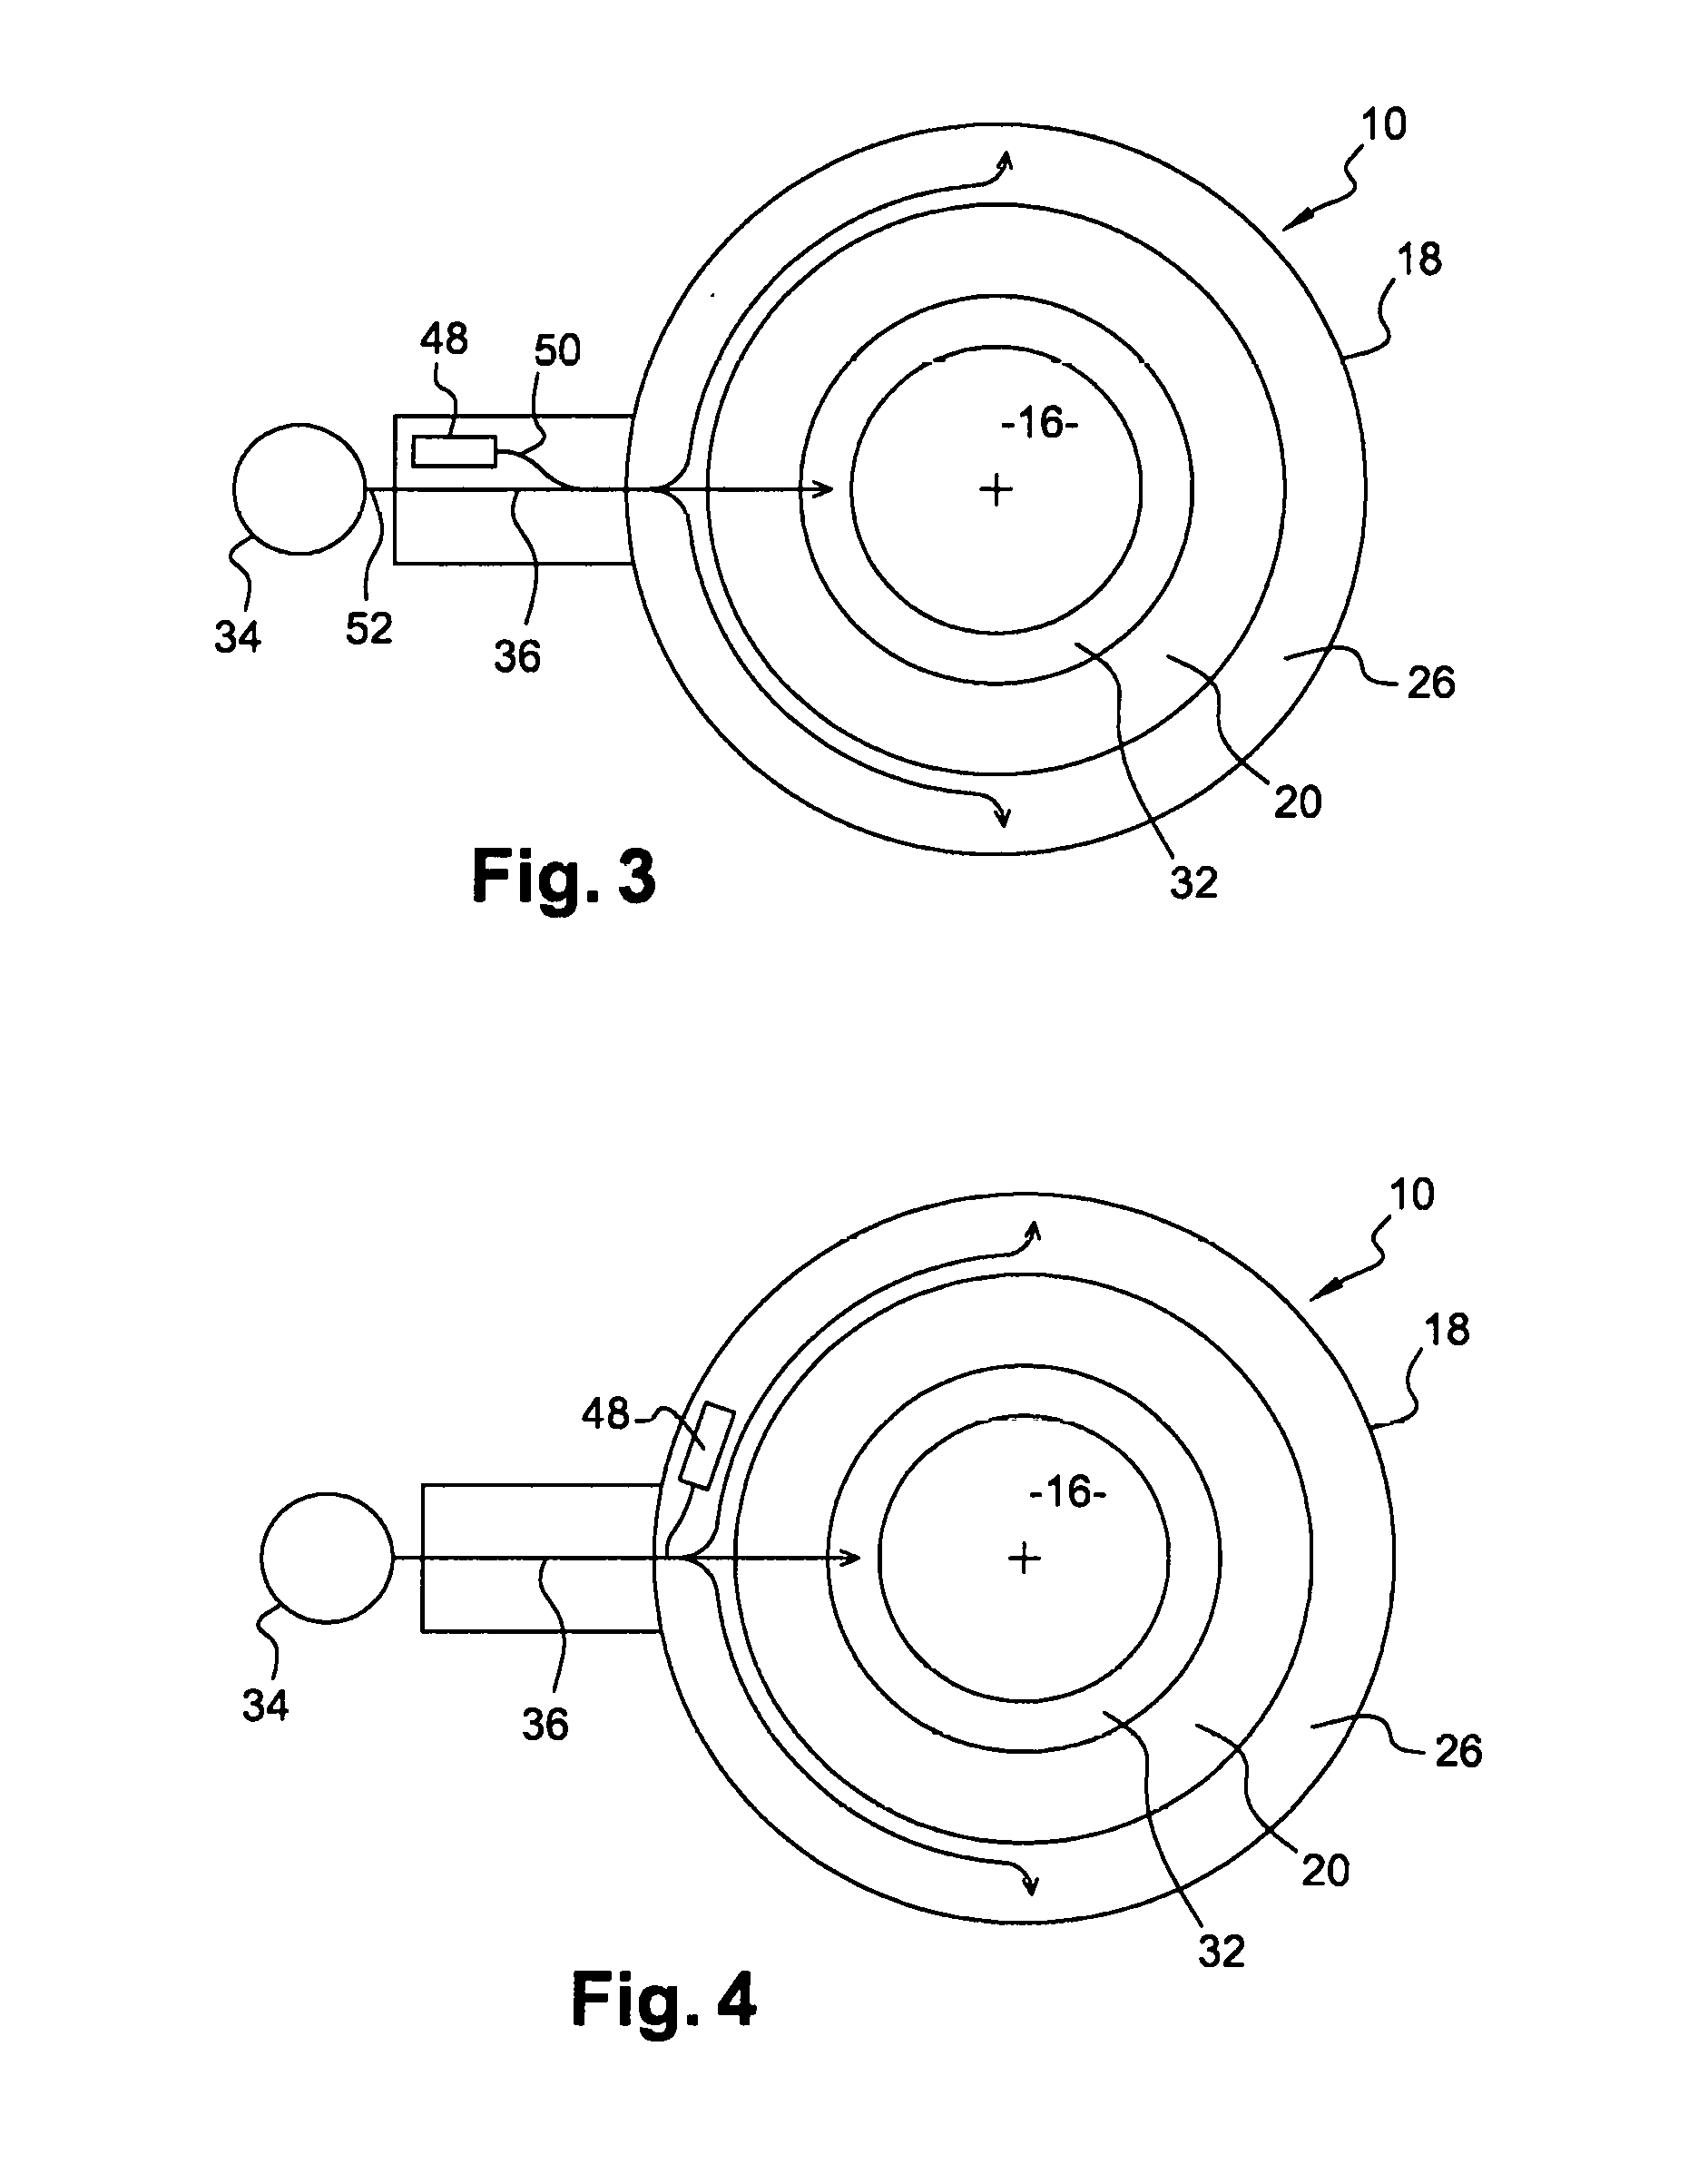 Aircraft propulsion assembly with fire extinguishing system